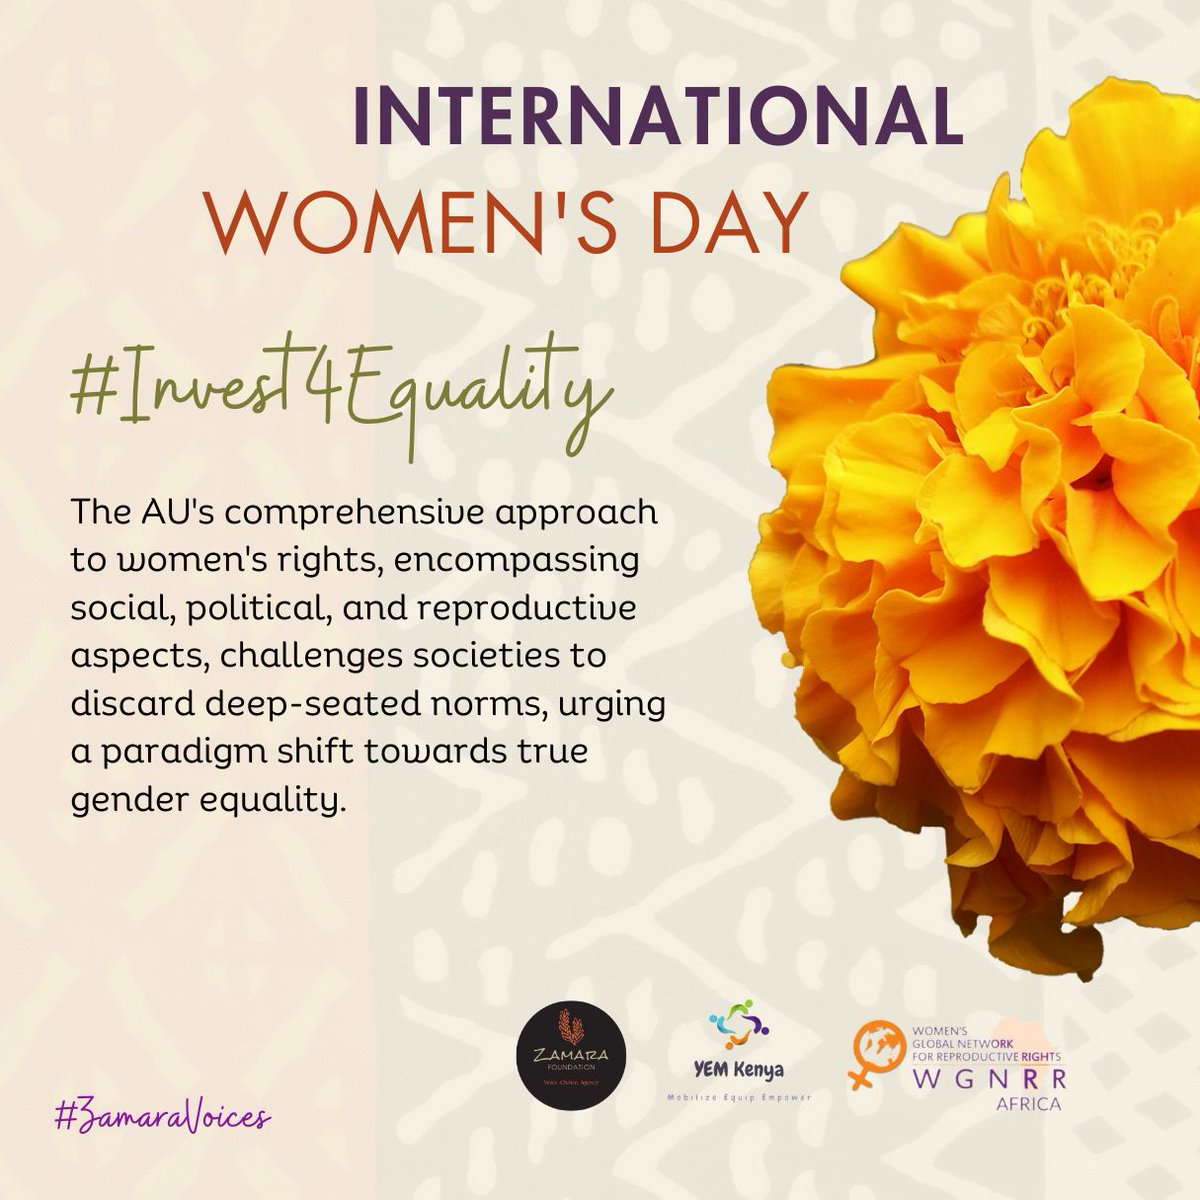 Women have the right to speak without being judged or stigmatized #invest4Equality 
@Zamara_fdn 
@YEMKenya
@wgnrr_africa